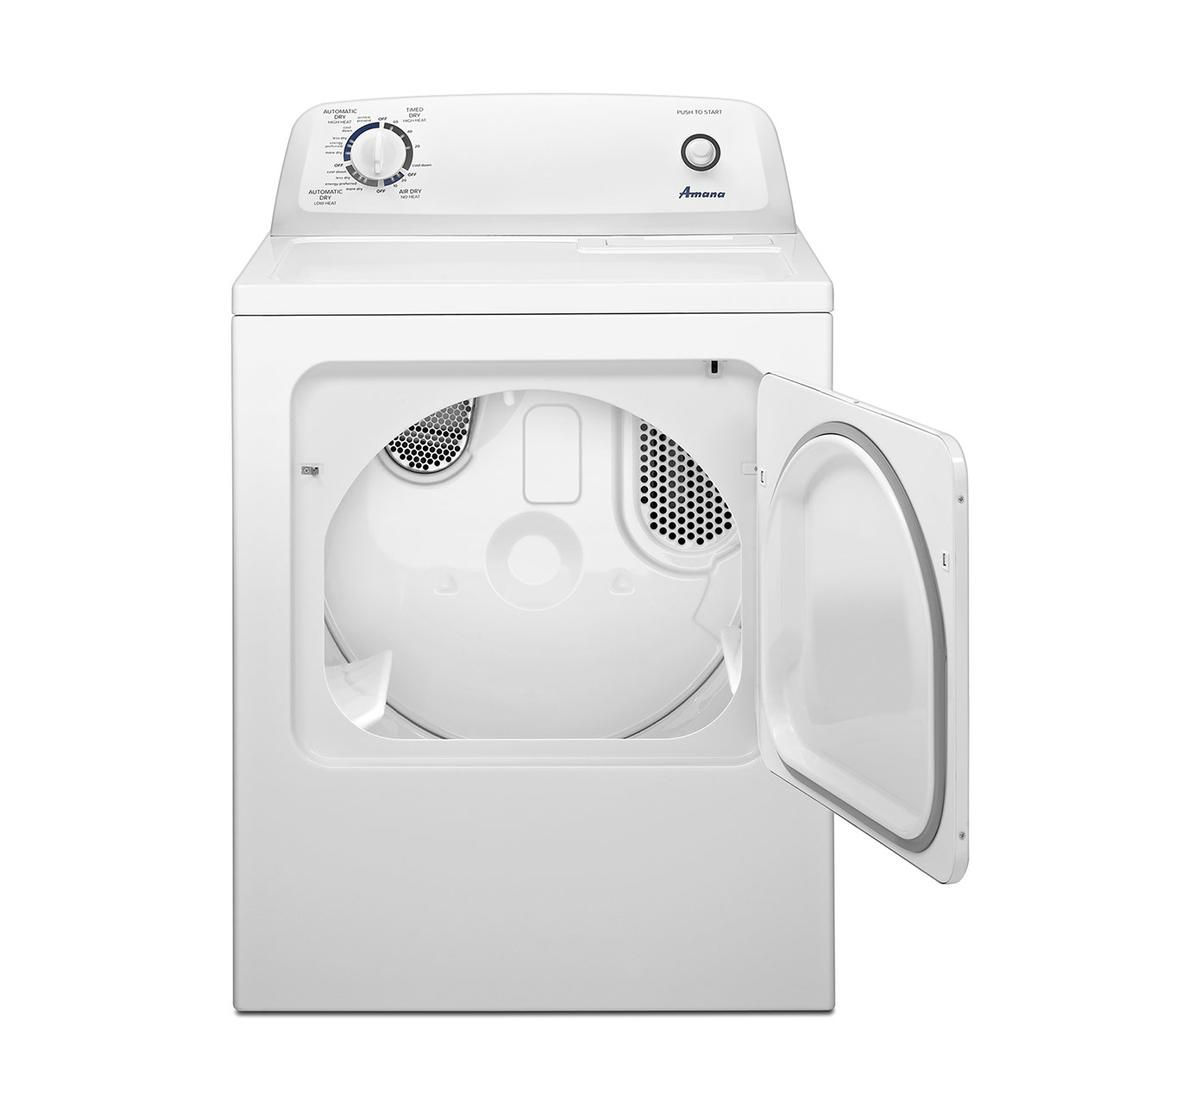 time-to-buy-a-clothes-dryer-gas-or-electric-dryer